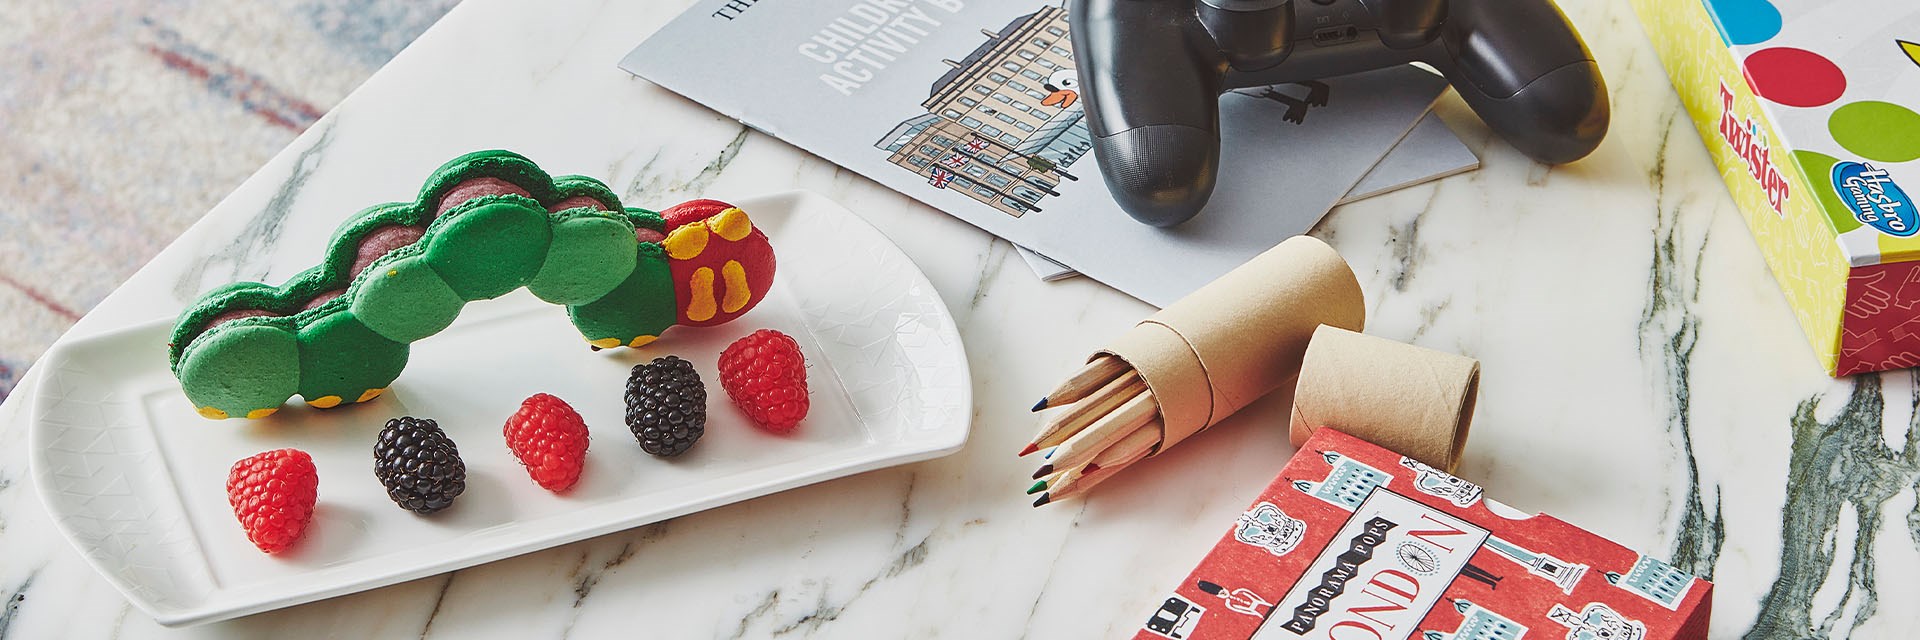 Caterpillar made from macarons, colouring pencils, game console controller, Children's activity book and twister board game on table